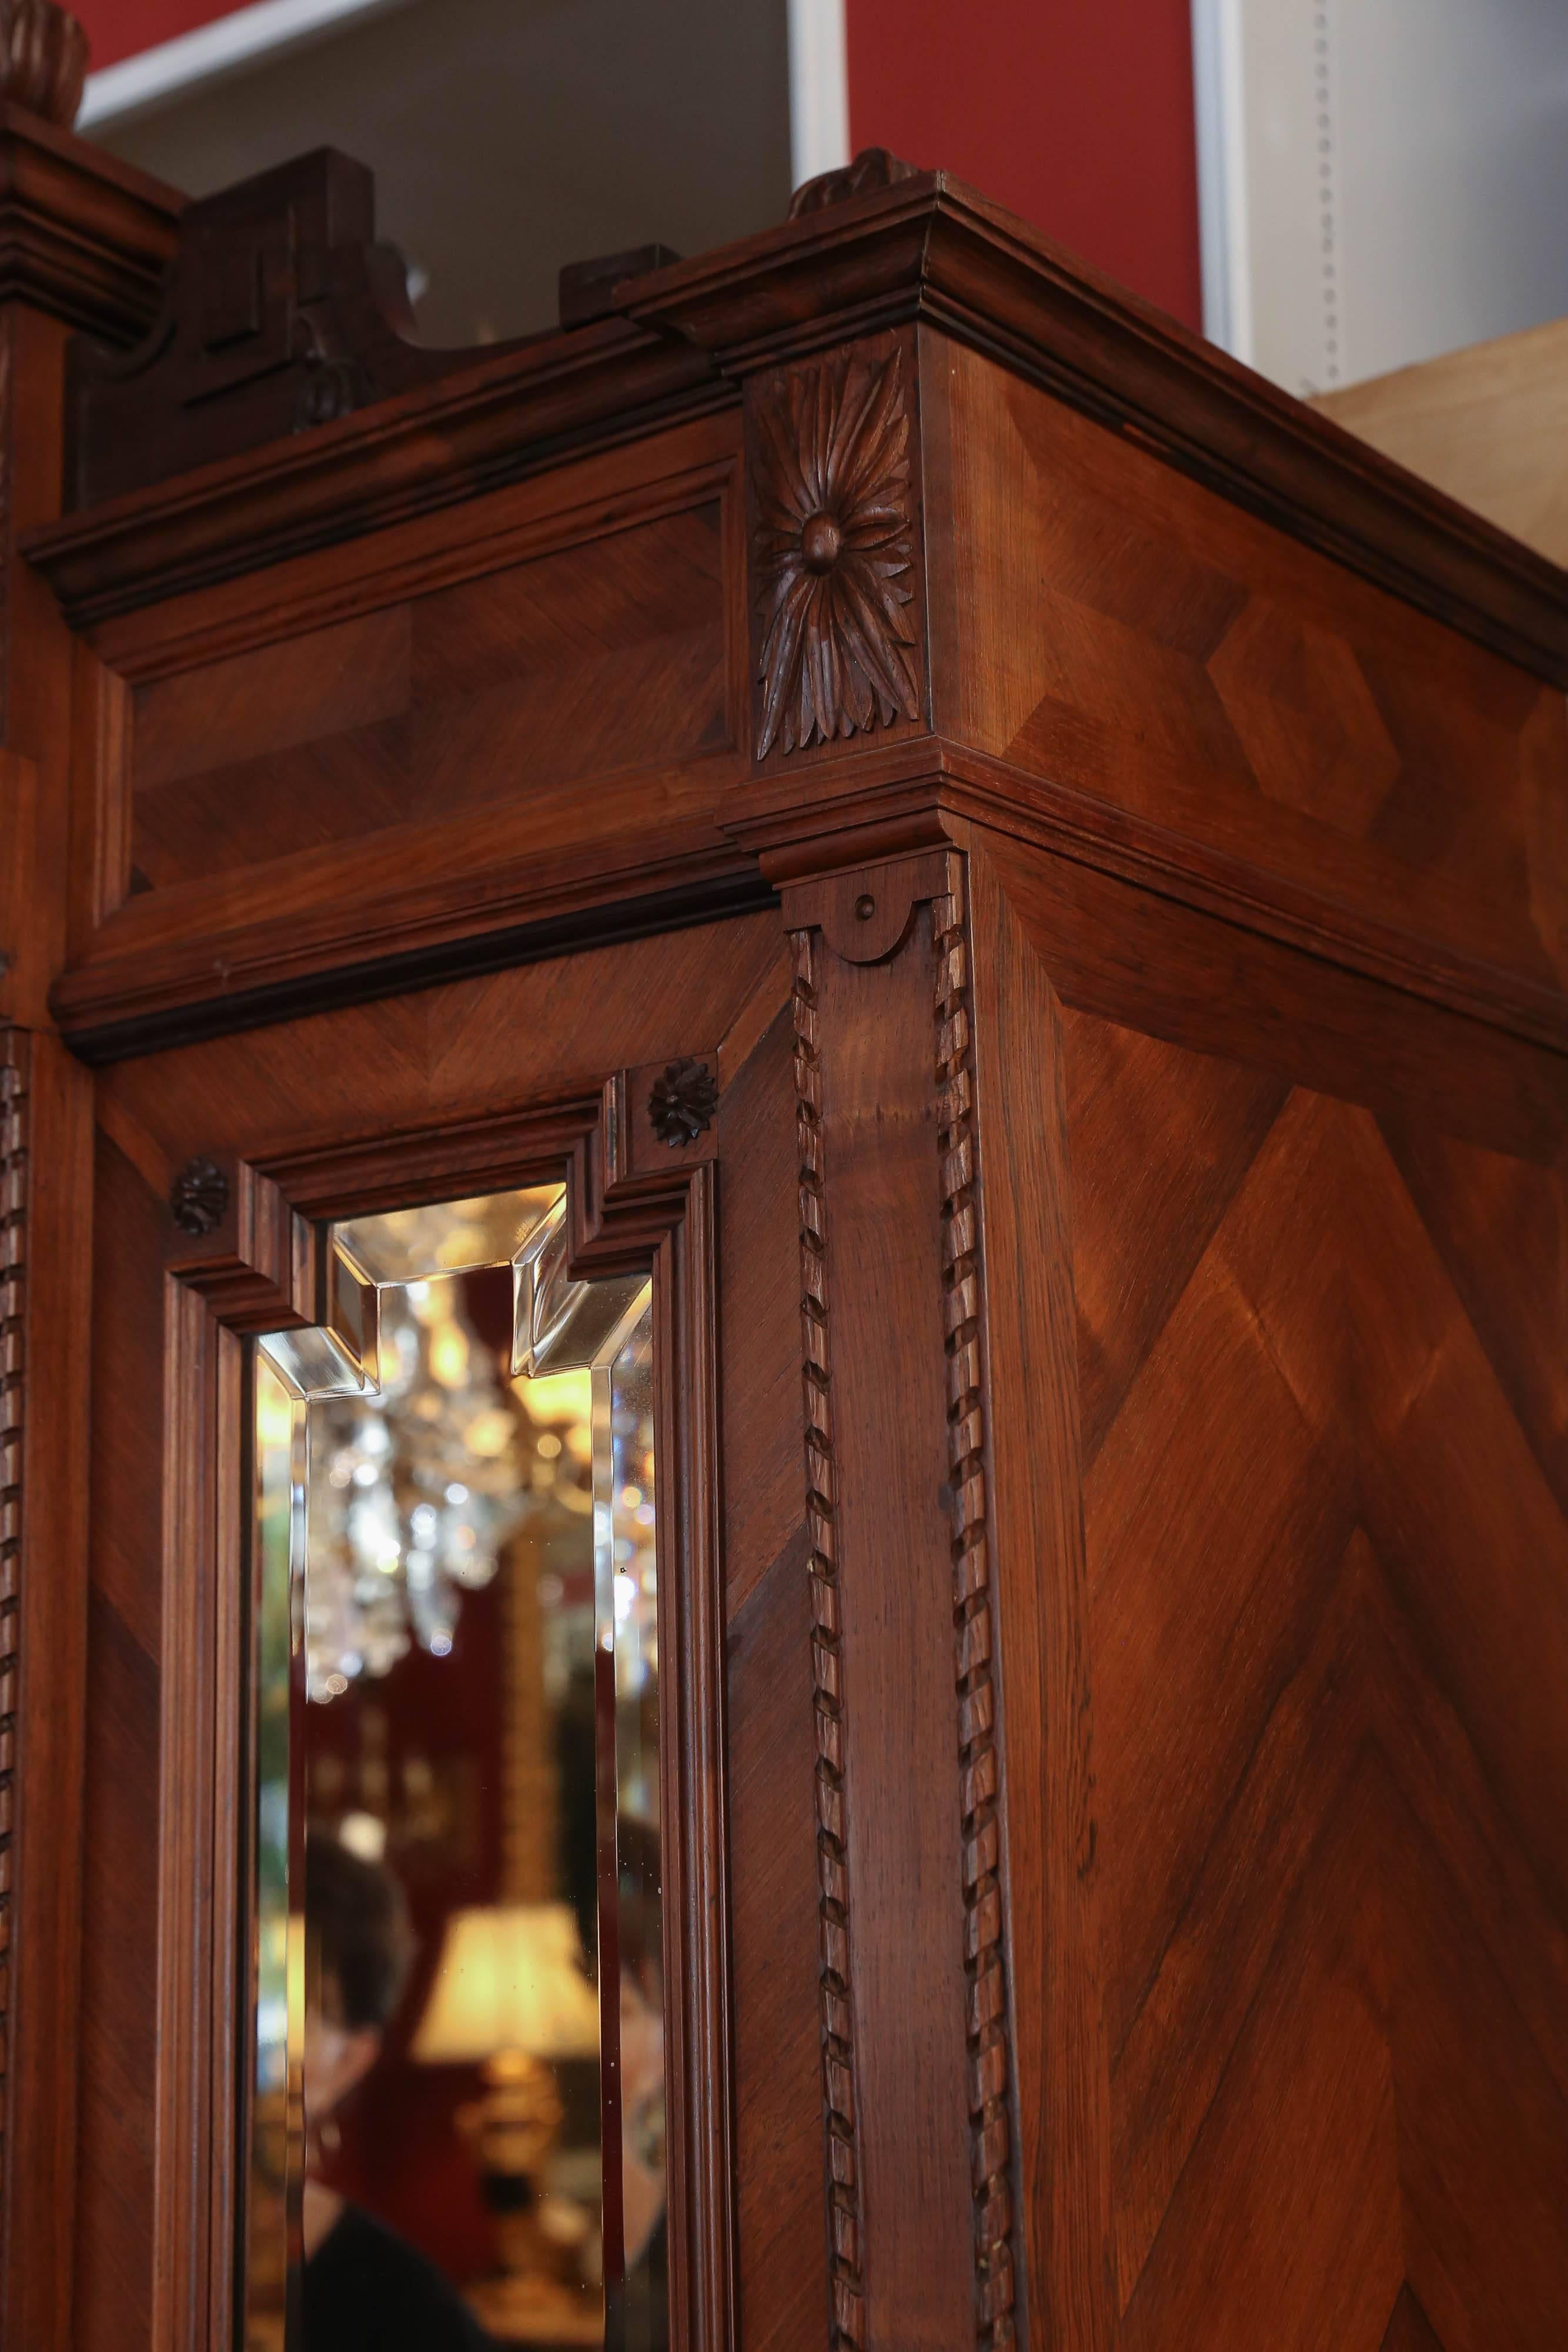 Large triple mirror armoire made of walnut with a pediment
wood carved with a circular motif with flowers and ribbons.
All the mirrors are original, bevelled and clear. A finely
carved gadrooned edging runs the vertical length of this
piece. It